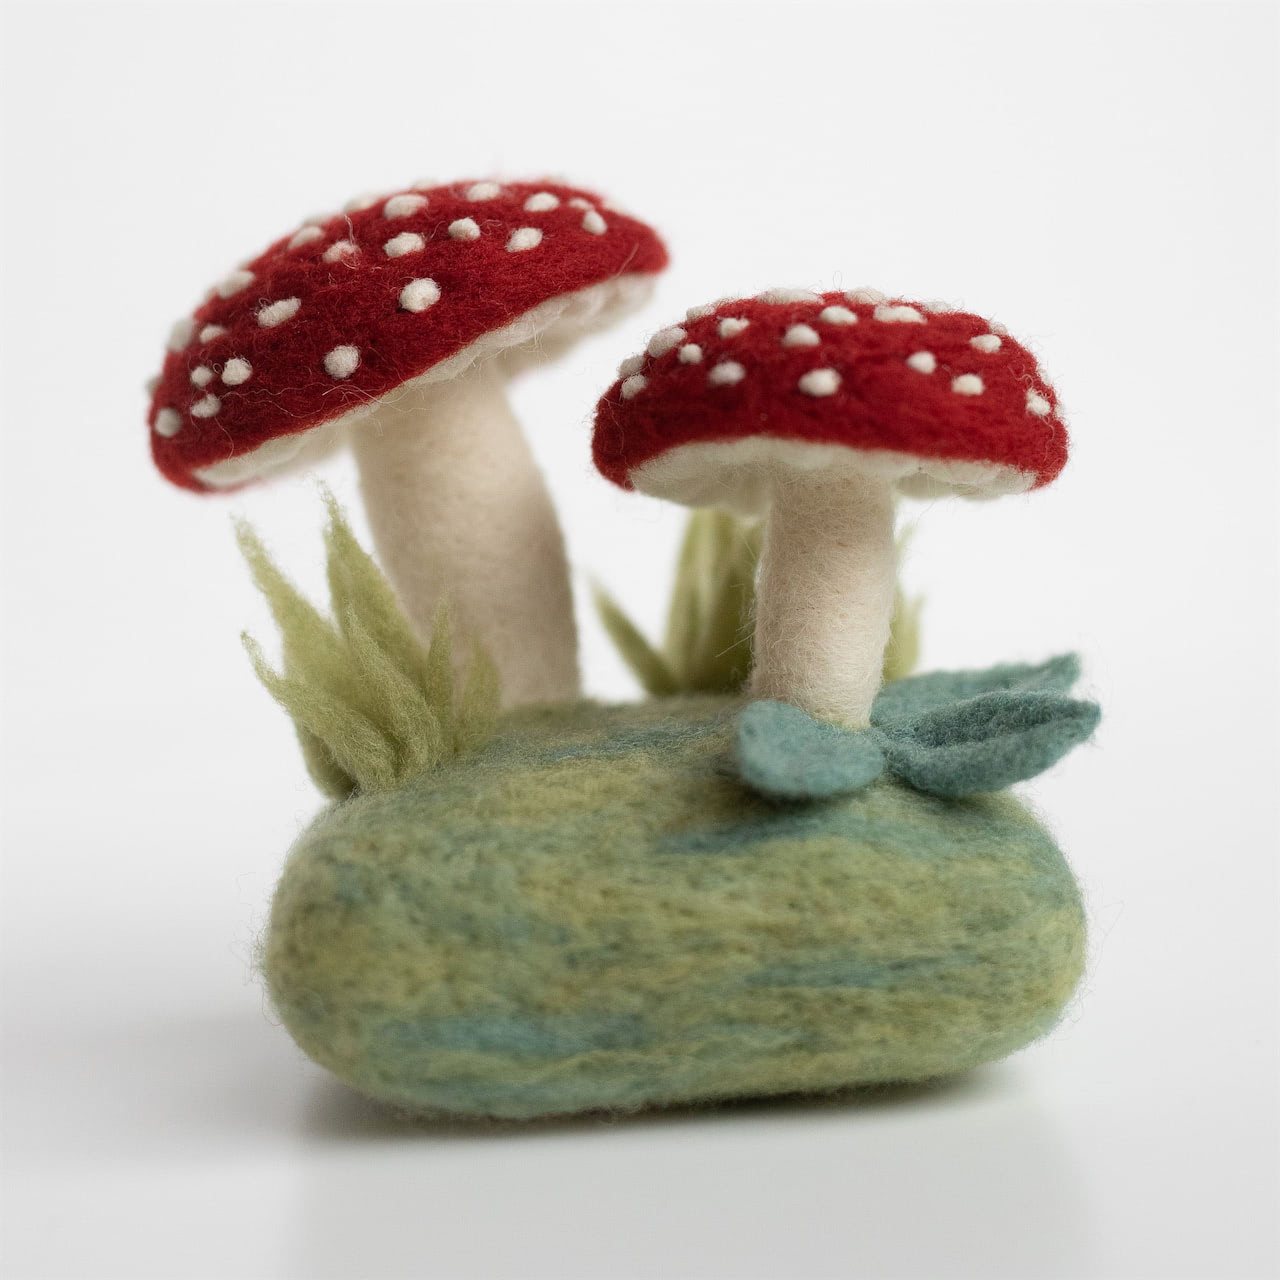 A kit to create a needle felted forest toadstool sculpture.